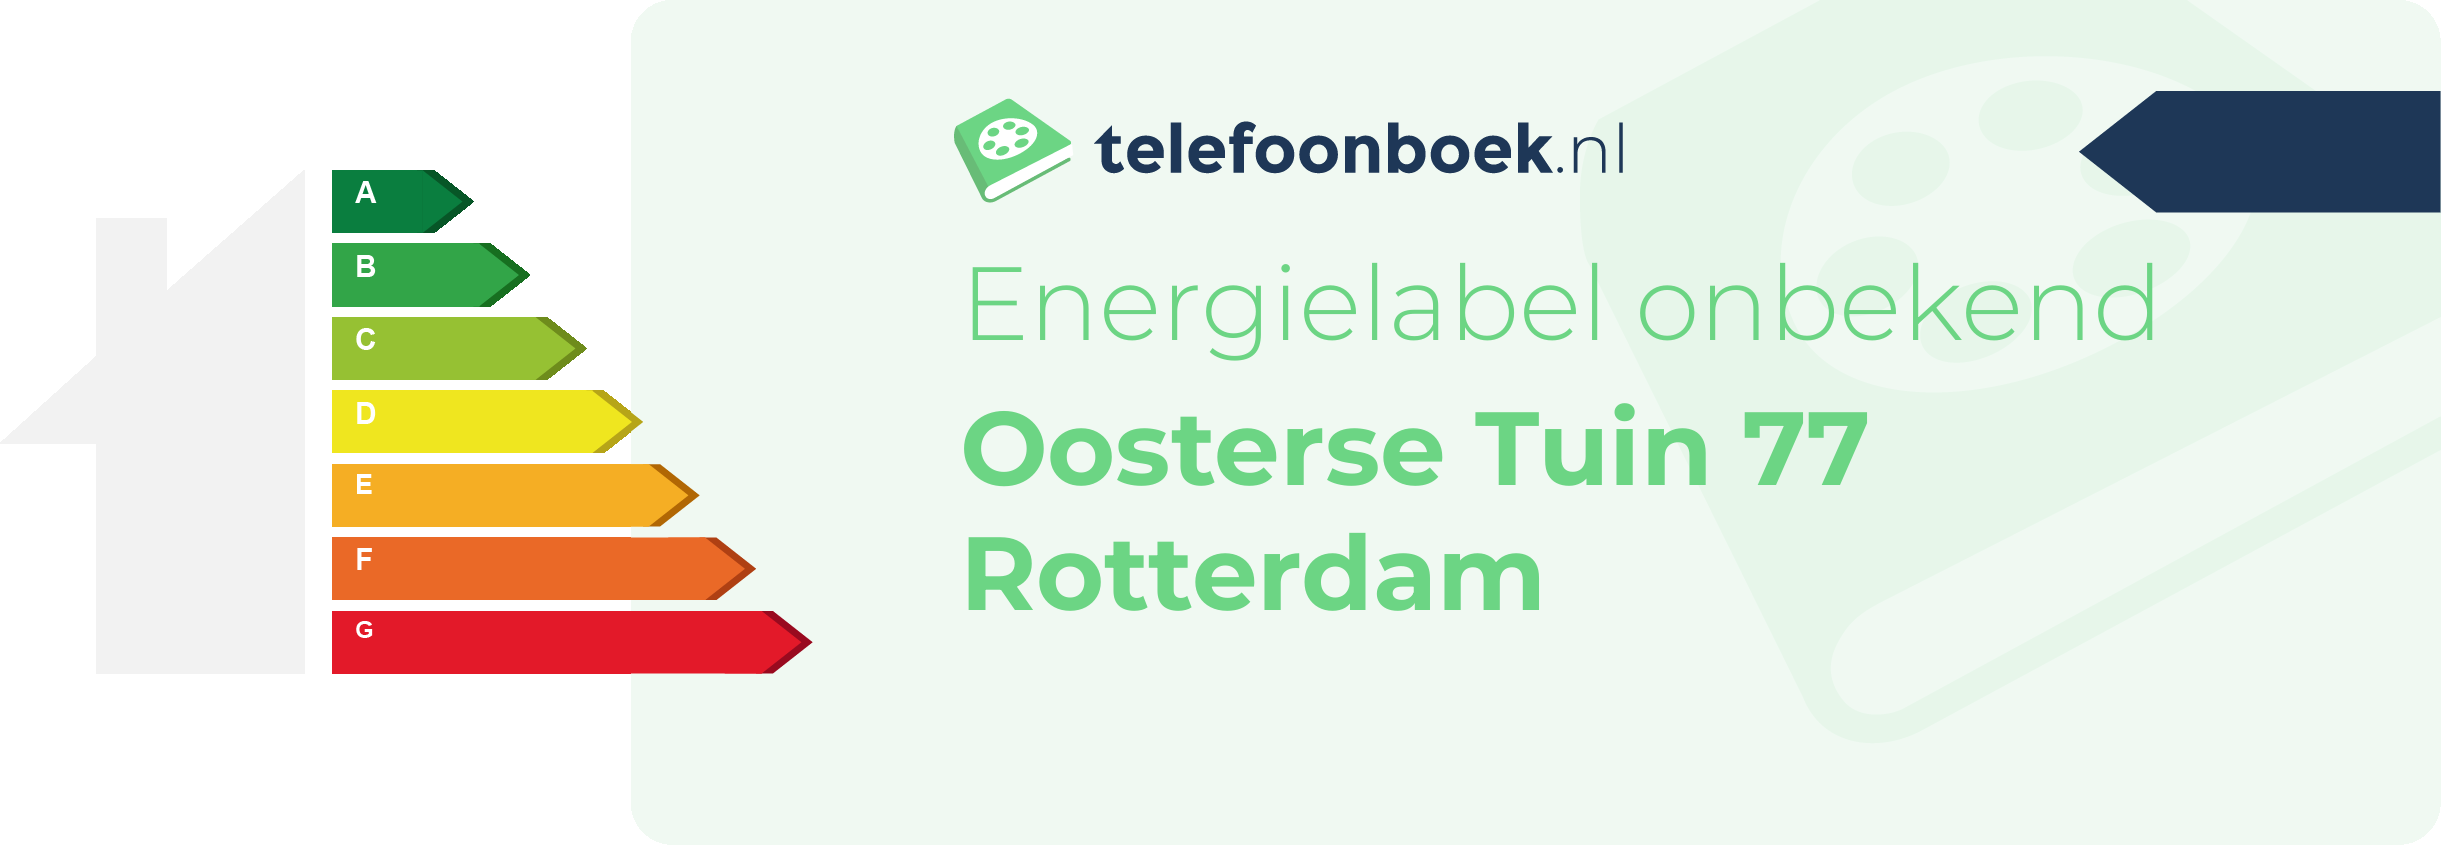 Energielabel Oosterse Tuin 77 Rotterdam